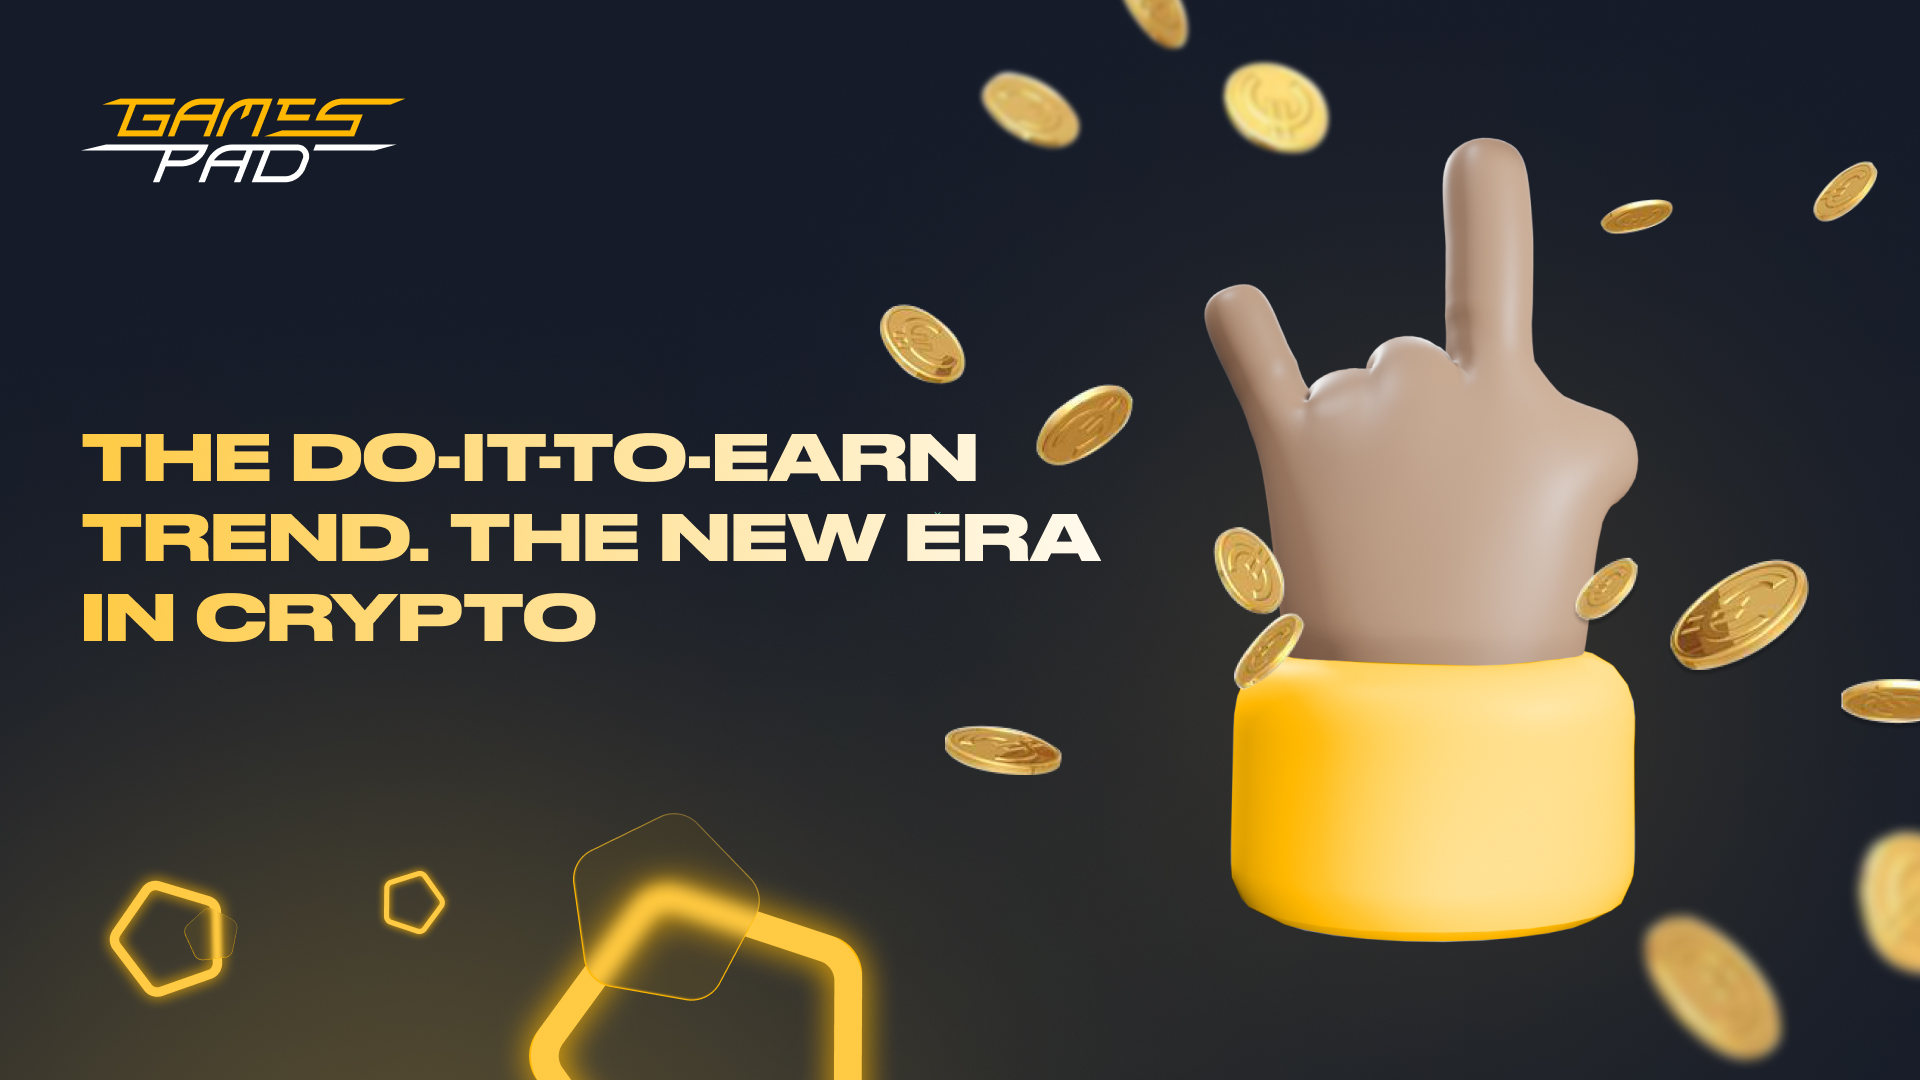 The Do-It-To-Earn Trend. The New Era in Crypto